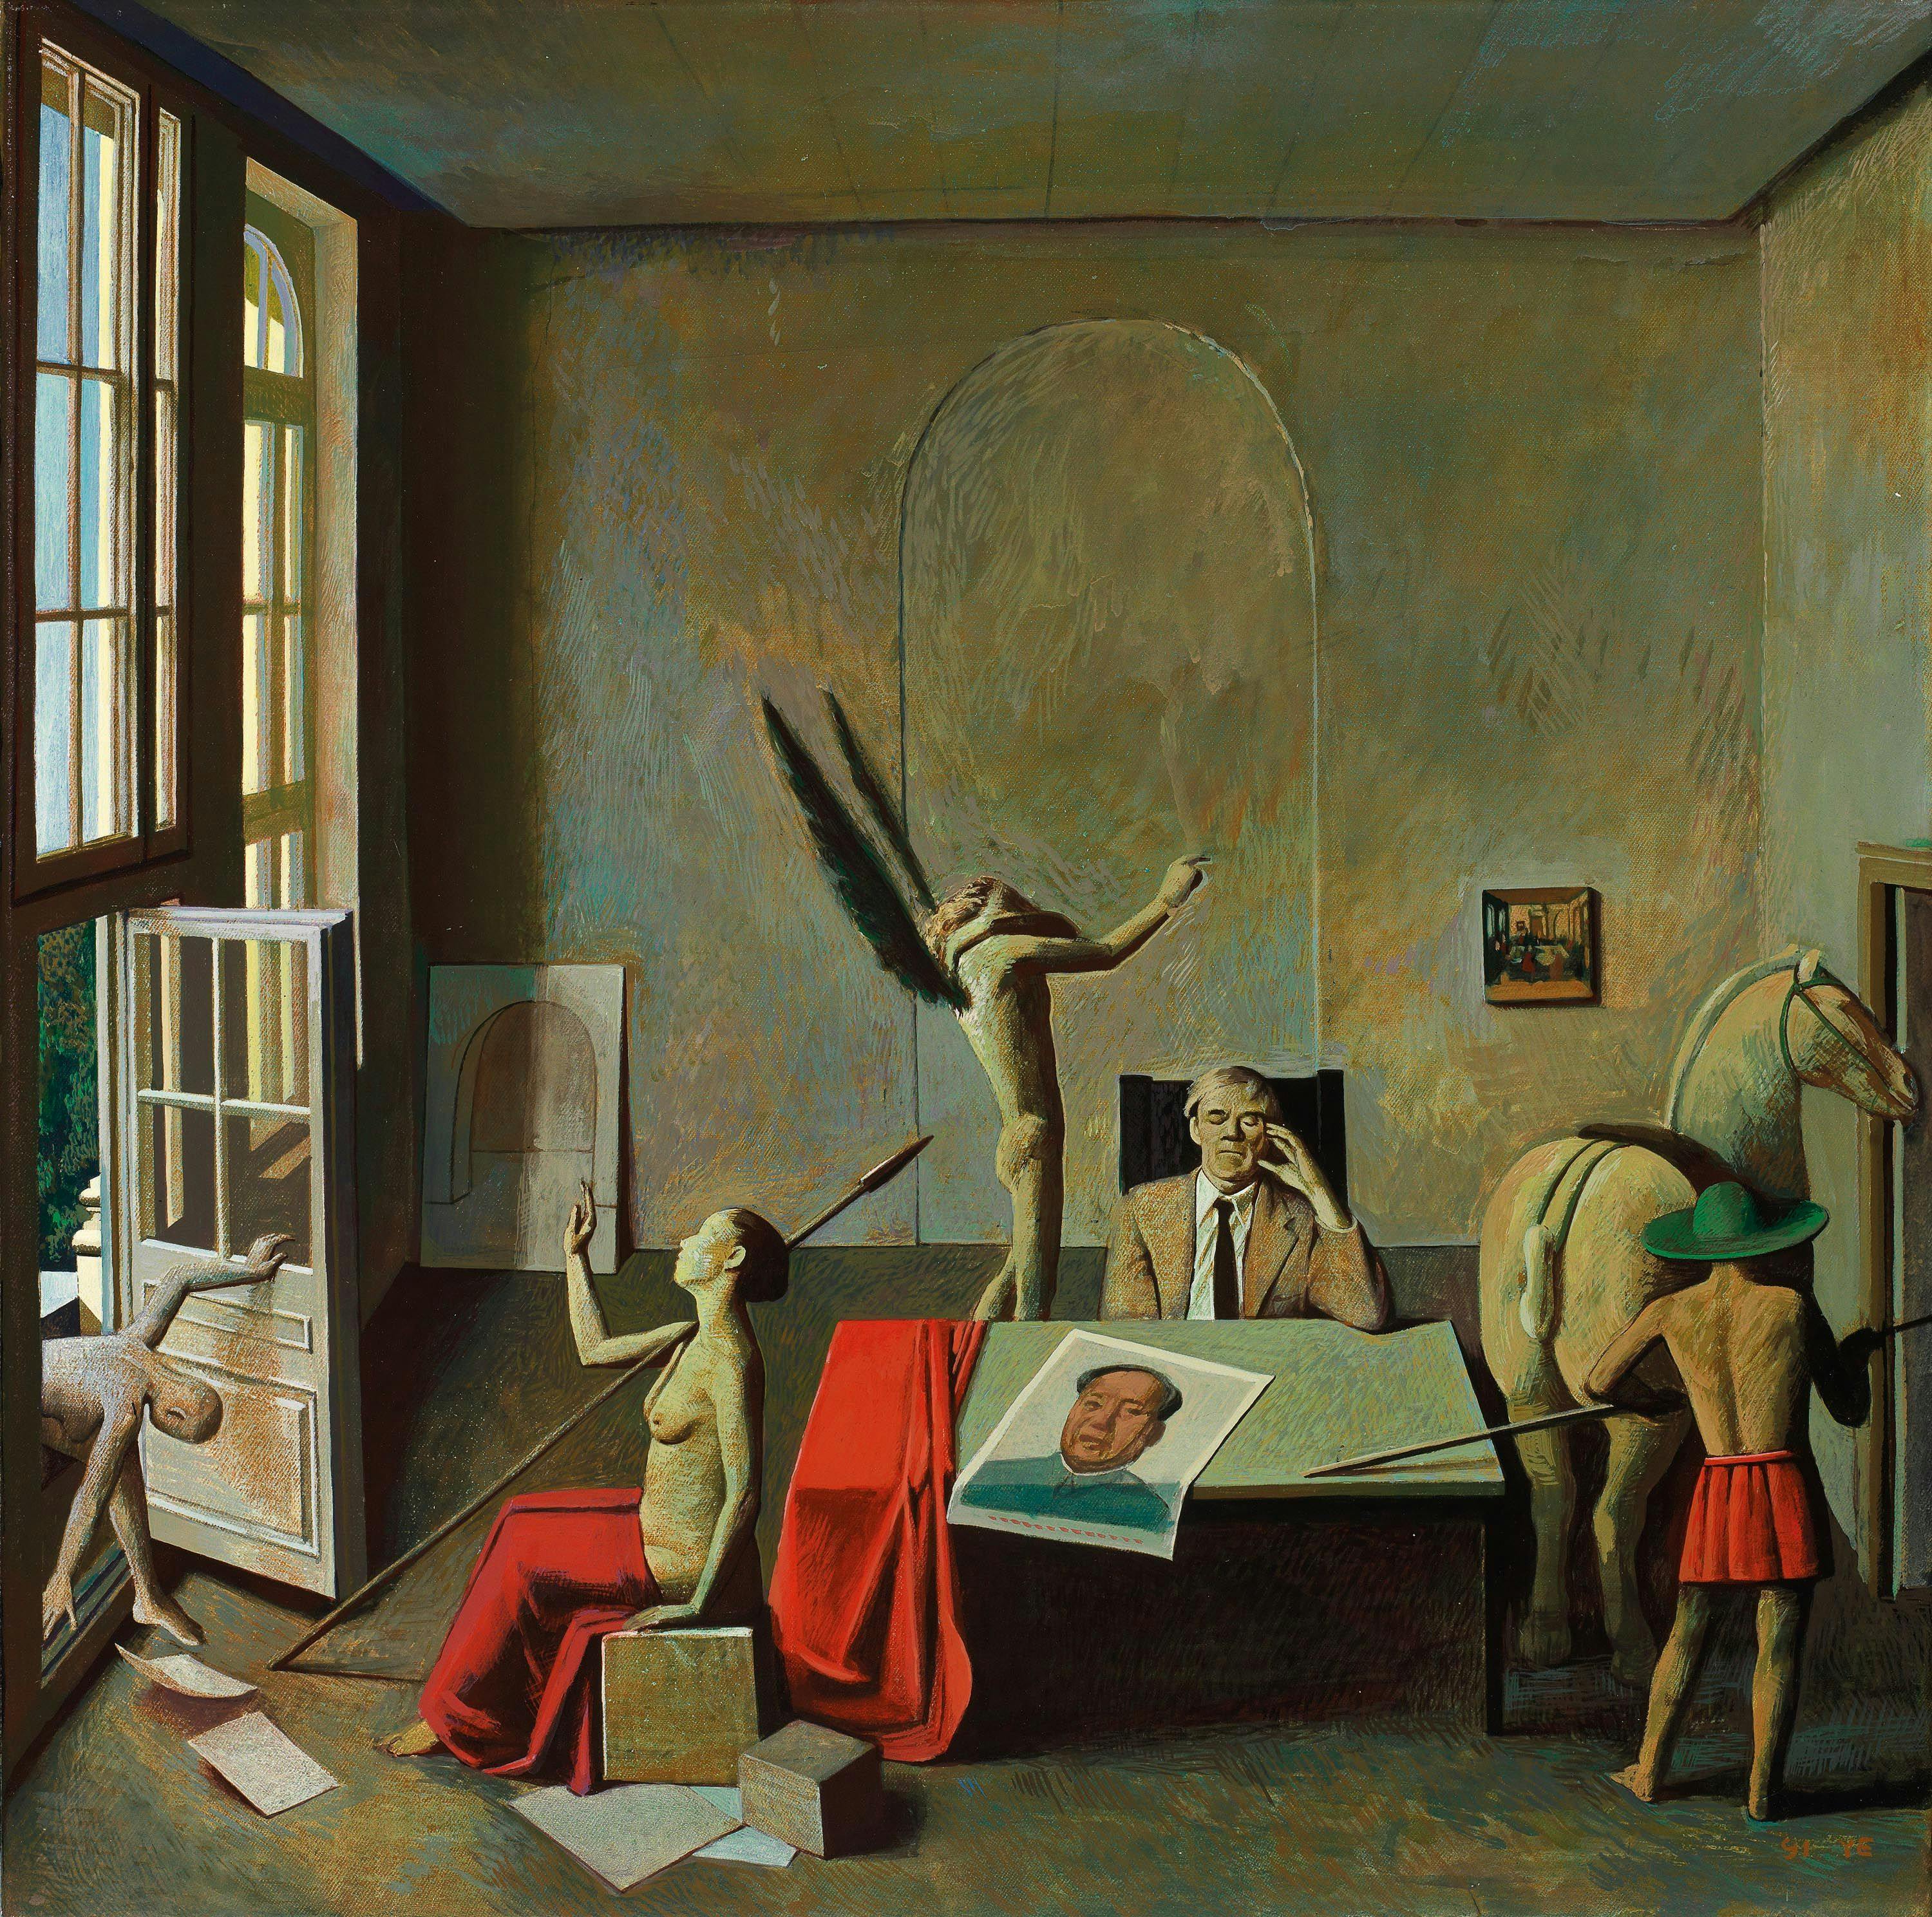 A painting by Liu Ye, titled Atelier, dated 1991.